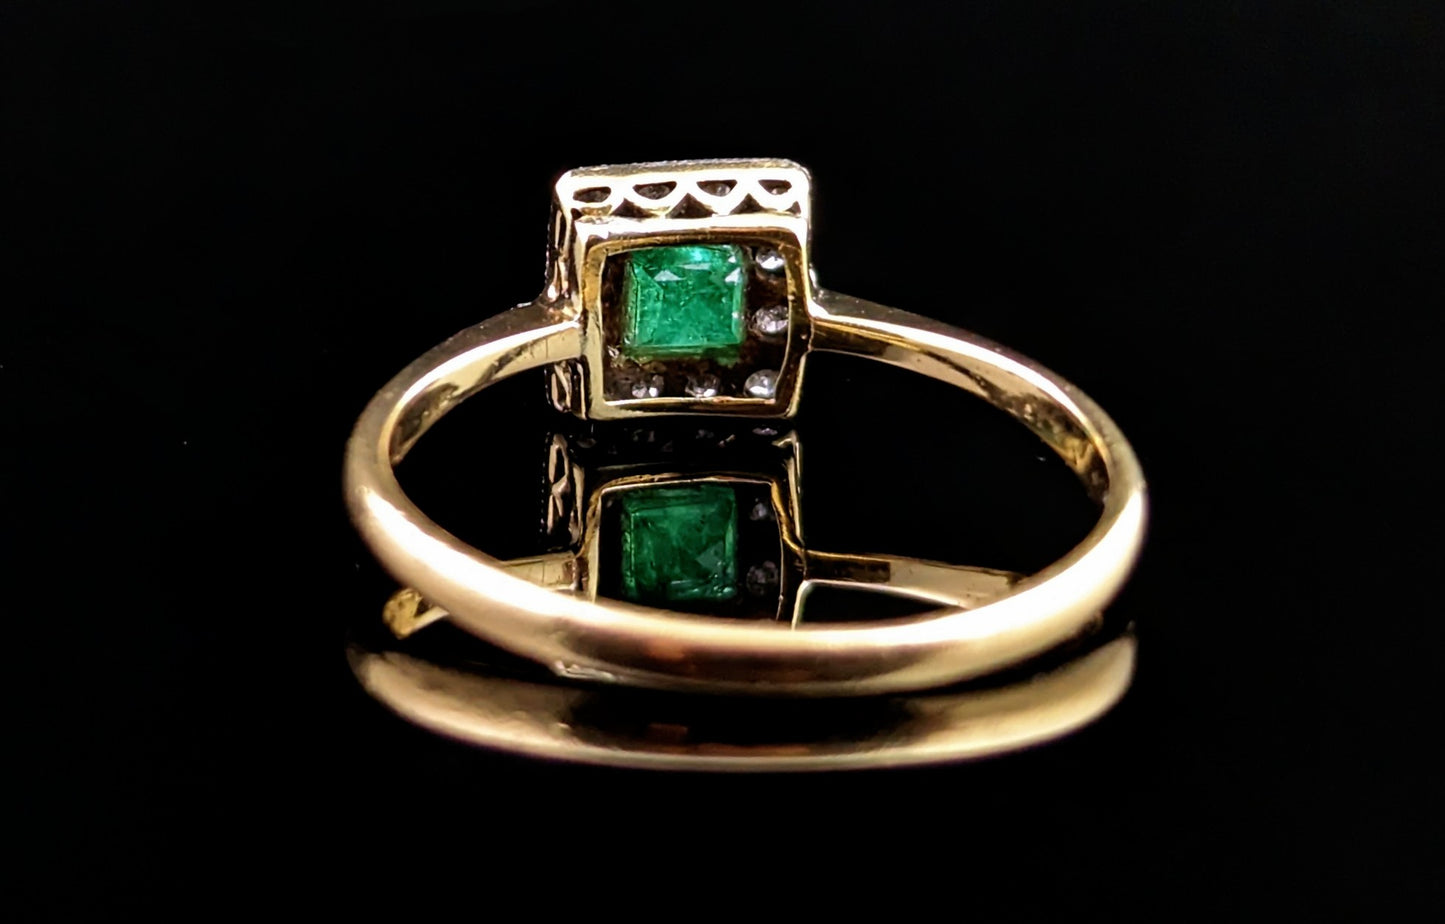 Vintage Art Deco Emerald and Diamond ring, 18ct gold and Platinum